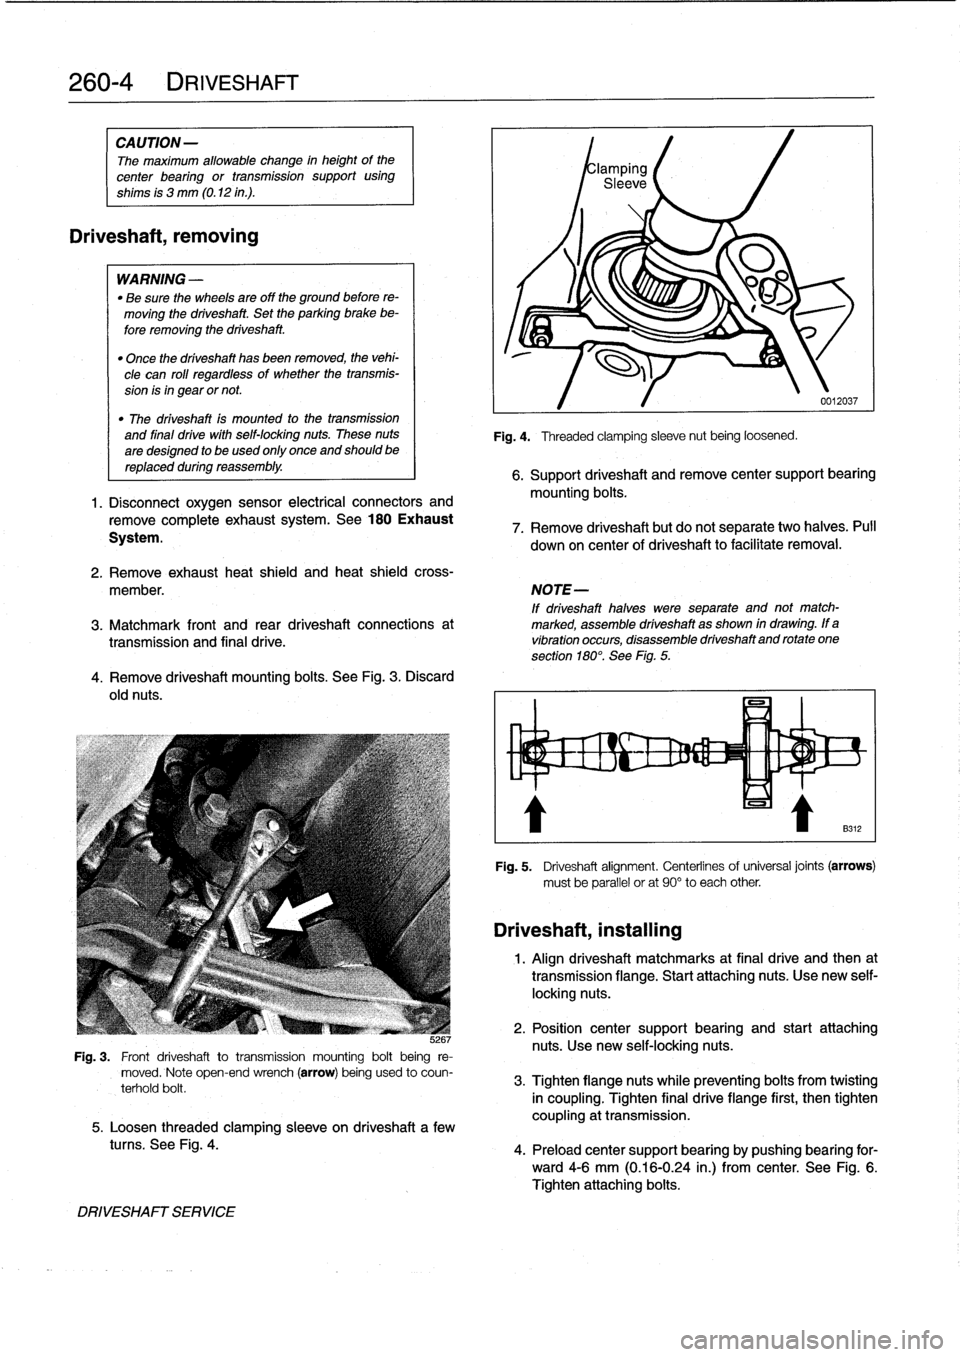 BMW 323i 1993 E36 Workshop Manual 
260-
4
DRIVESHAFT

CAUTION
-

The
maximum
allowable
change
in
height
of
the

center
bearing
or
transmission
support
using

shims
is
3
mm
(0
.12
in
.)
.

Driveshaft,
removing

WARNING
-

"
Be
sure
the